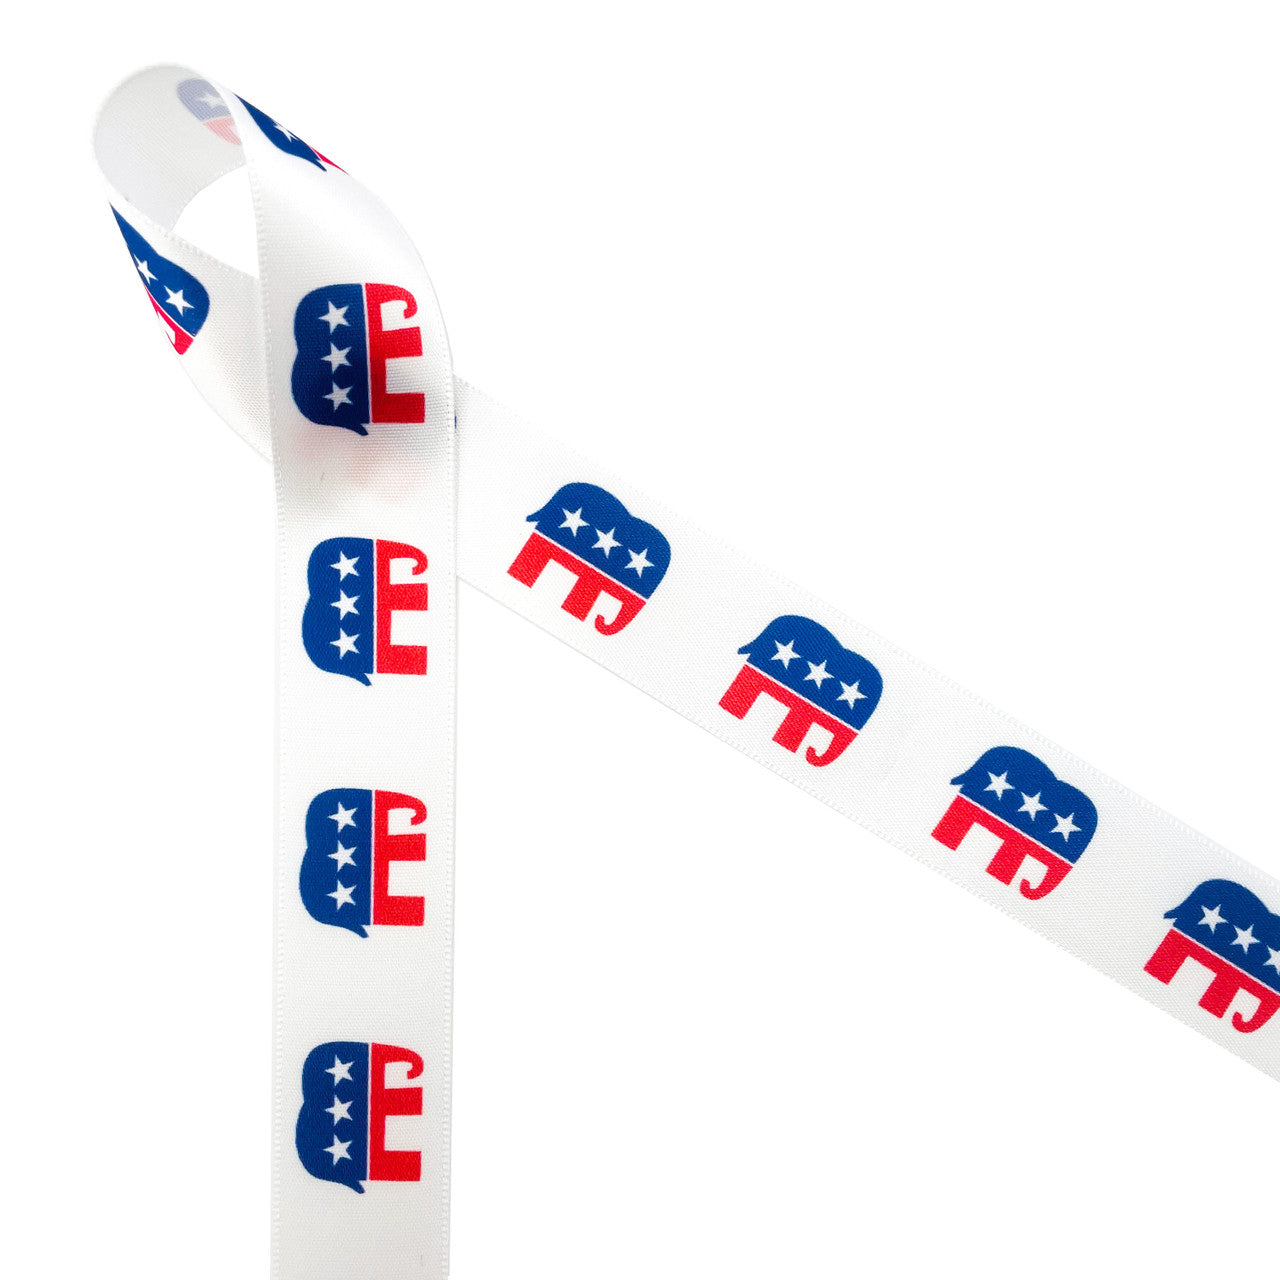 Republican Elephant ribbon in red and blue with stars printed on 7/8" white single face satin is the ideal ribbon for election season events. This ribbon is perfect for Democratic fundraisers, rallies, conventions and parties. Use this ribbon for lapel pins, gift wrap, gift baskets, table decor, floral design, crafts, sewing and quilting projects. This ribbon is great for hair bows, head bands and fascinators too. All our ribbon is designed and printed in the USA